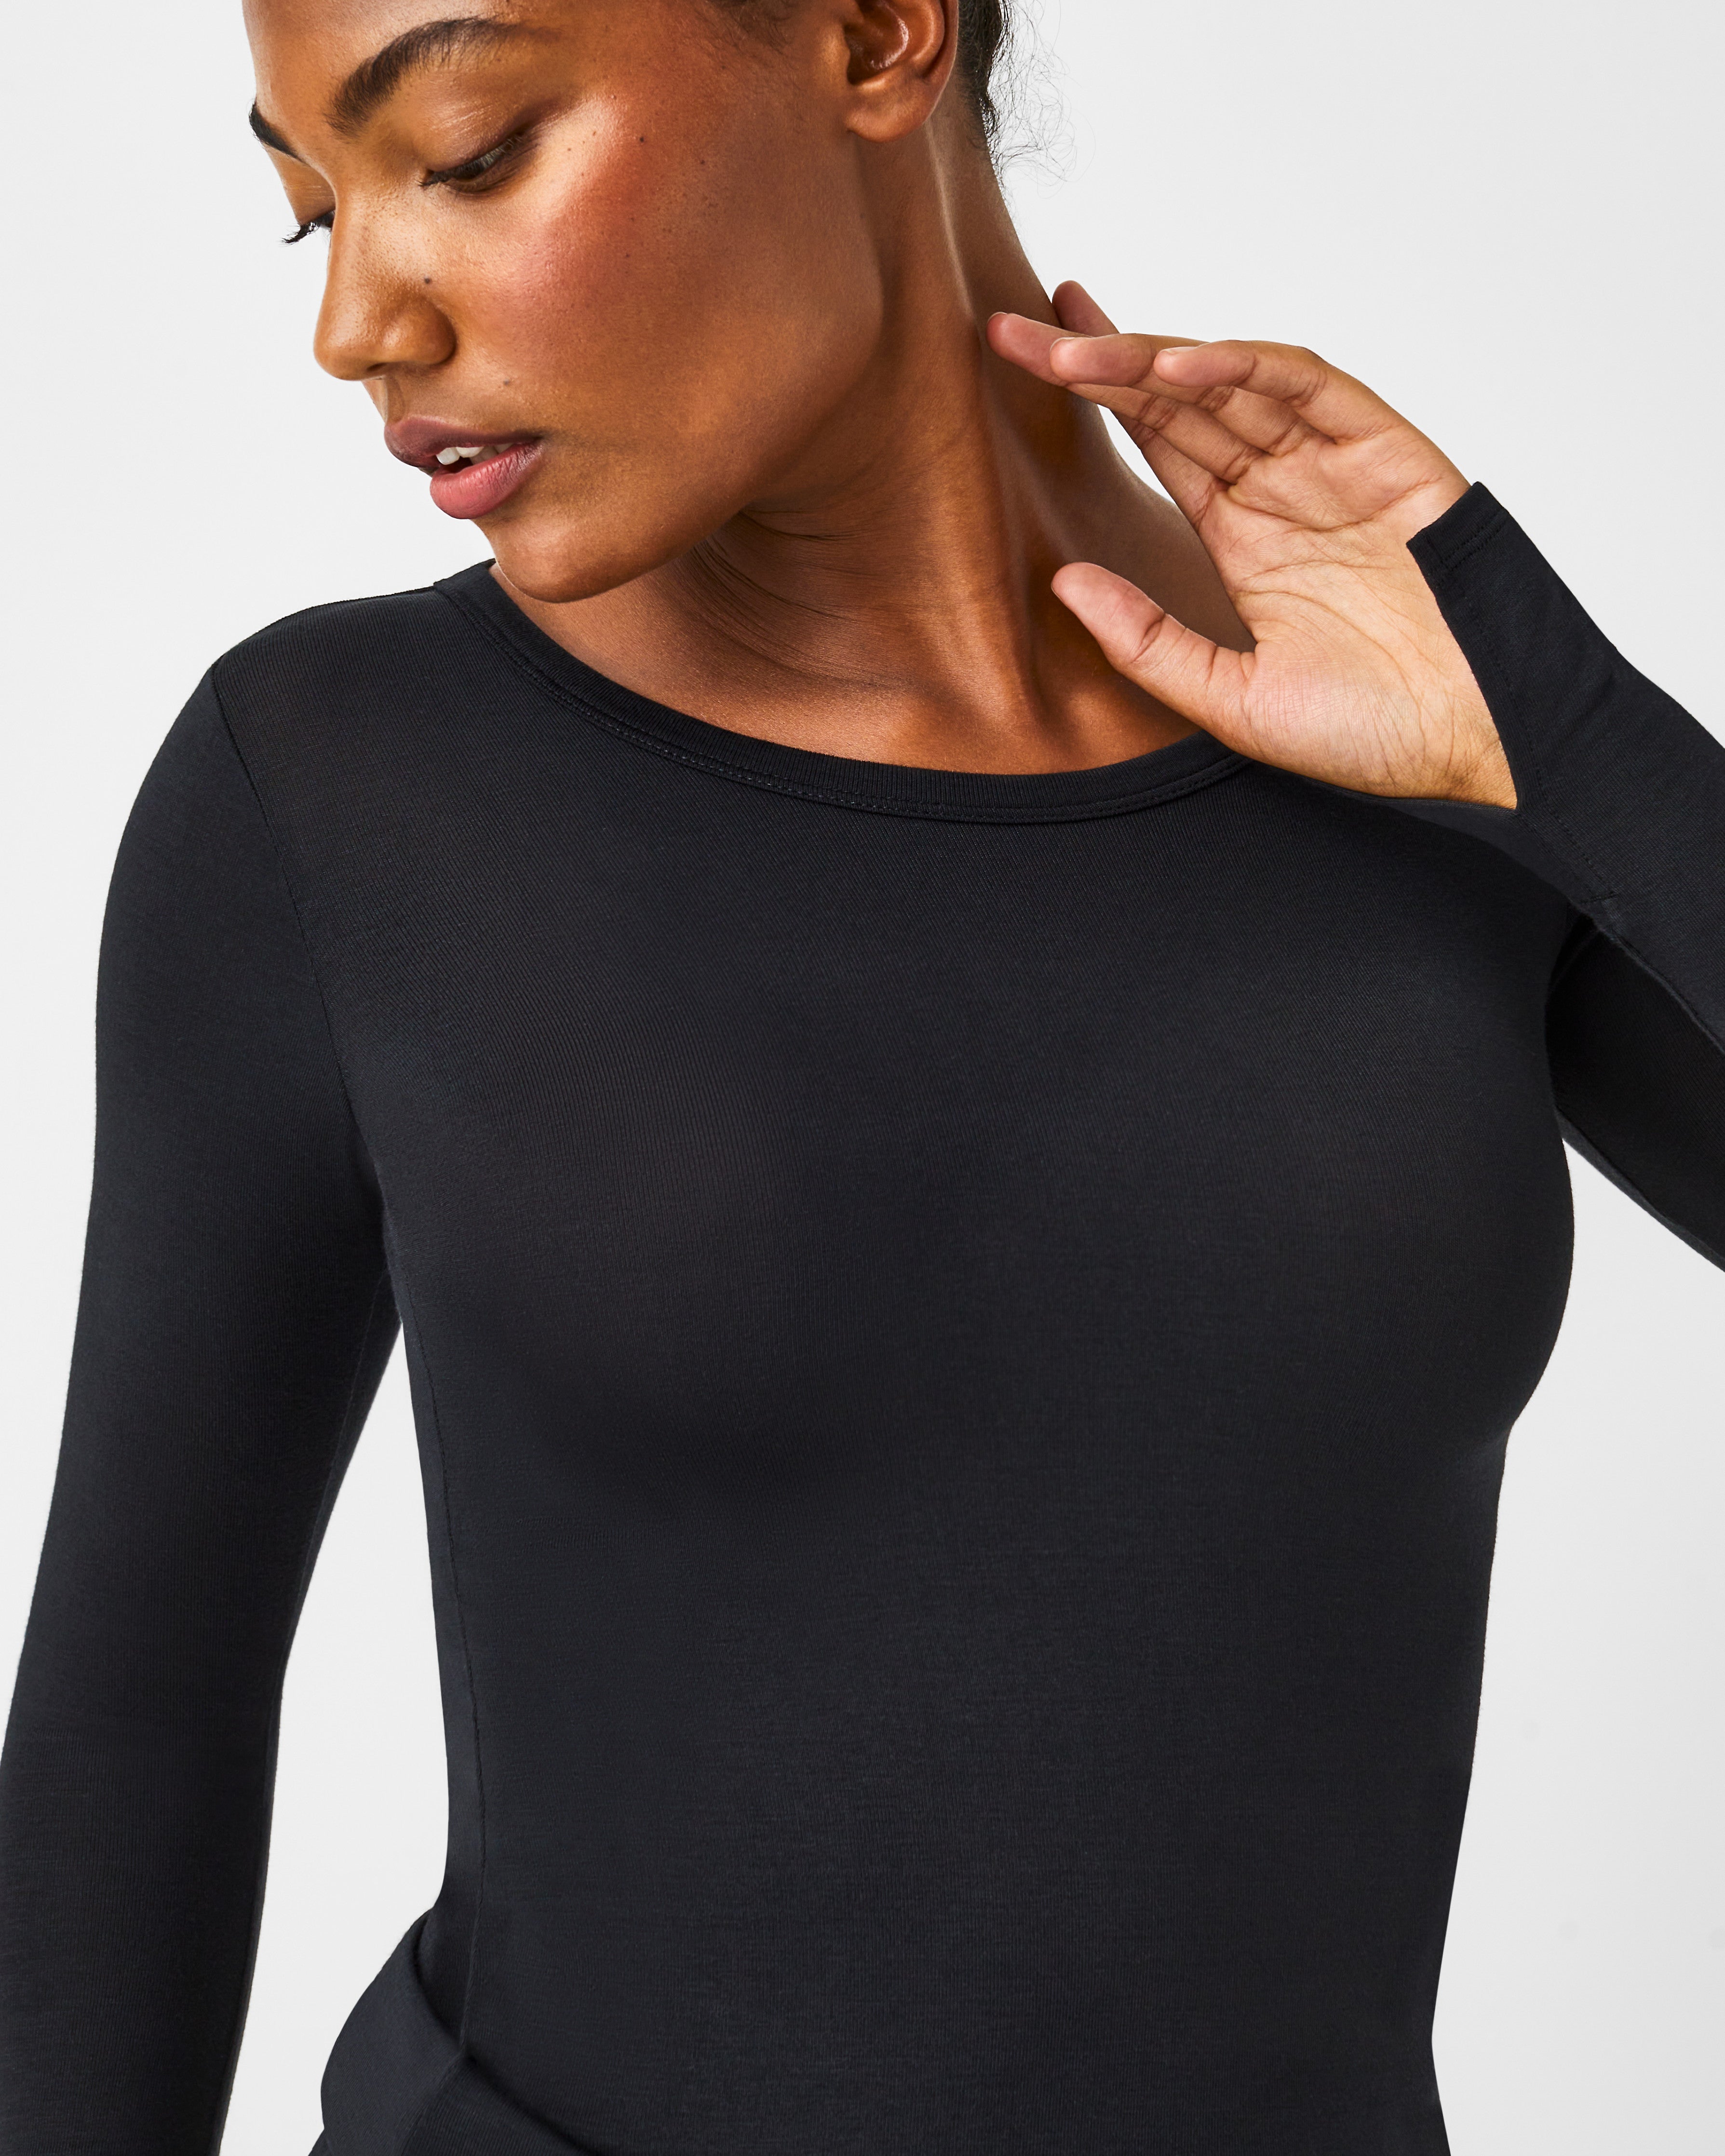 Spanx 973 Long Sleeve Turtleneck Shaping Control Top Slimming